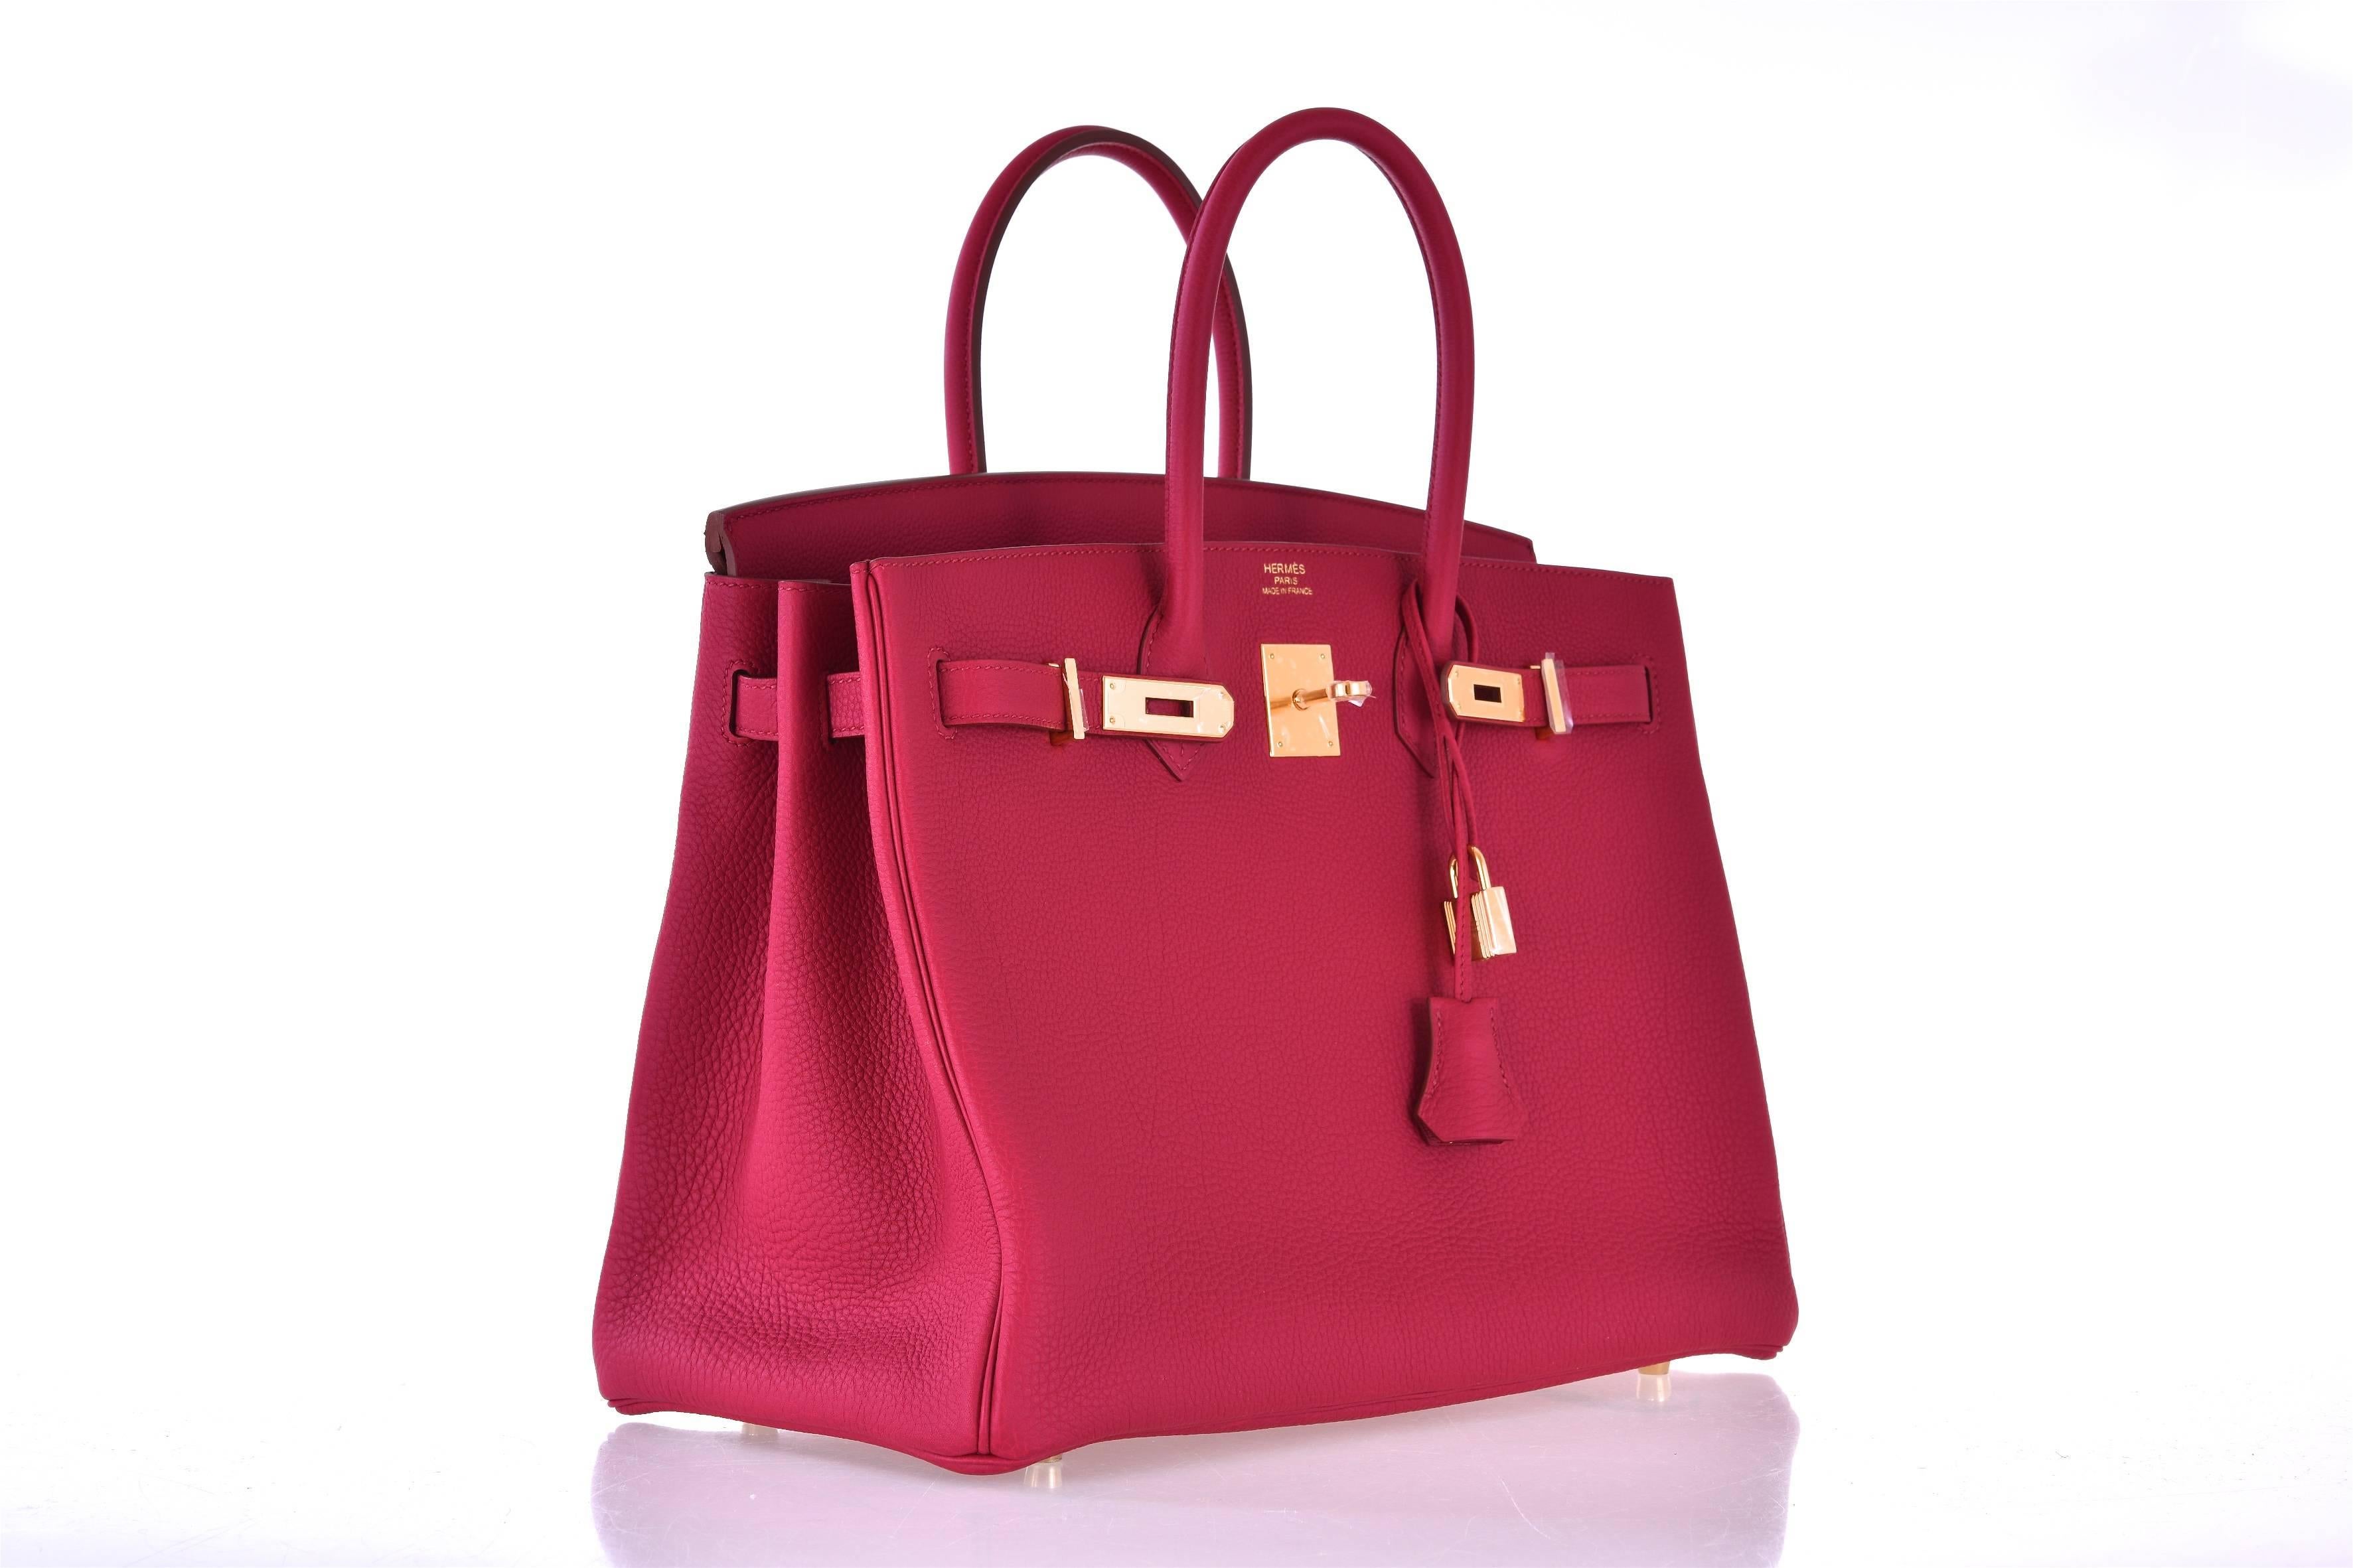 Hermes 35cm Birkin Bag Super Rare Rubis Togo leather GHW
New  Condition
Hardware: Gold
Country of Origin: France
Color: Flamingo  
Accompanied by: Care Booklet; Dust Bag Plastic Raincoat box
Closure: Clasp
Height (in inches): 9
Width (in